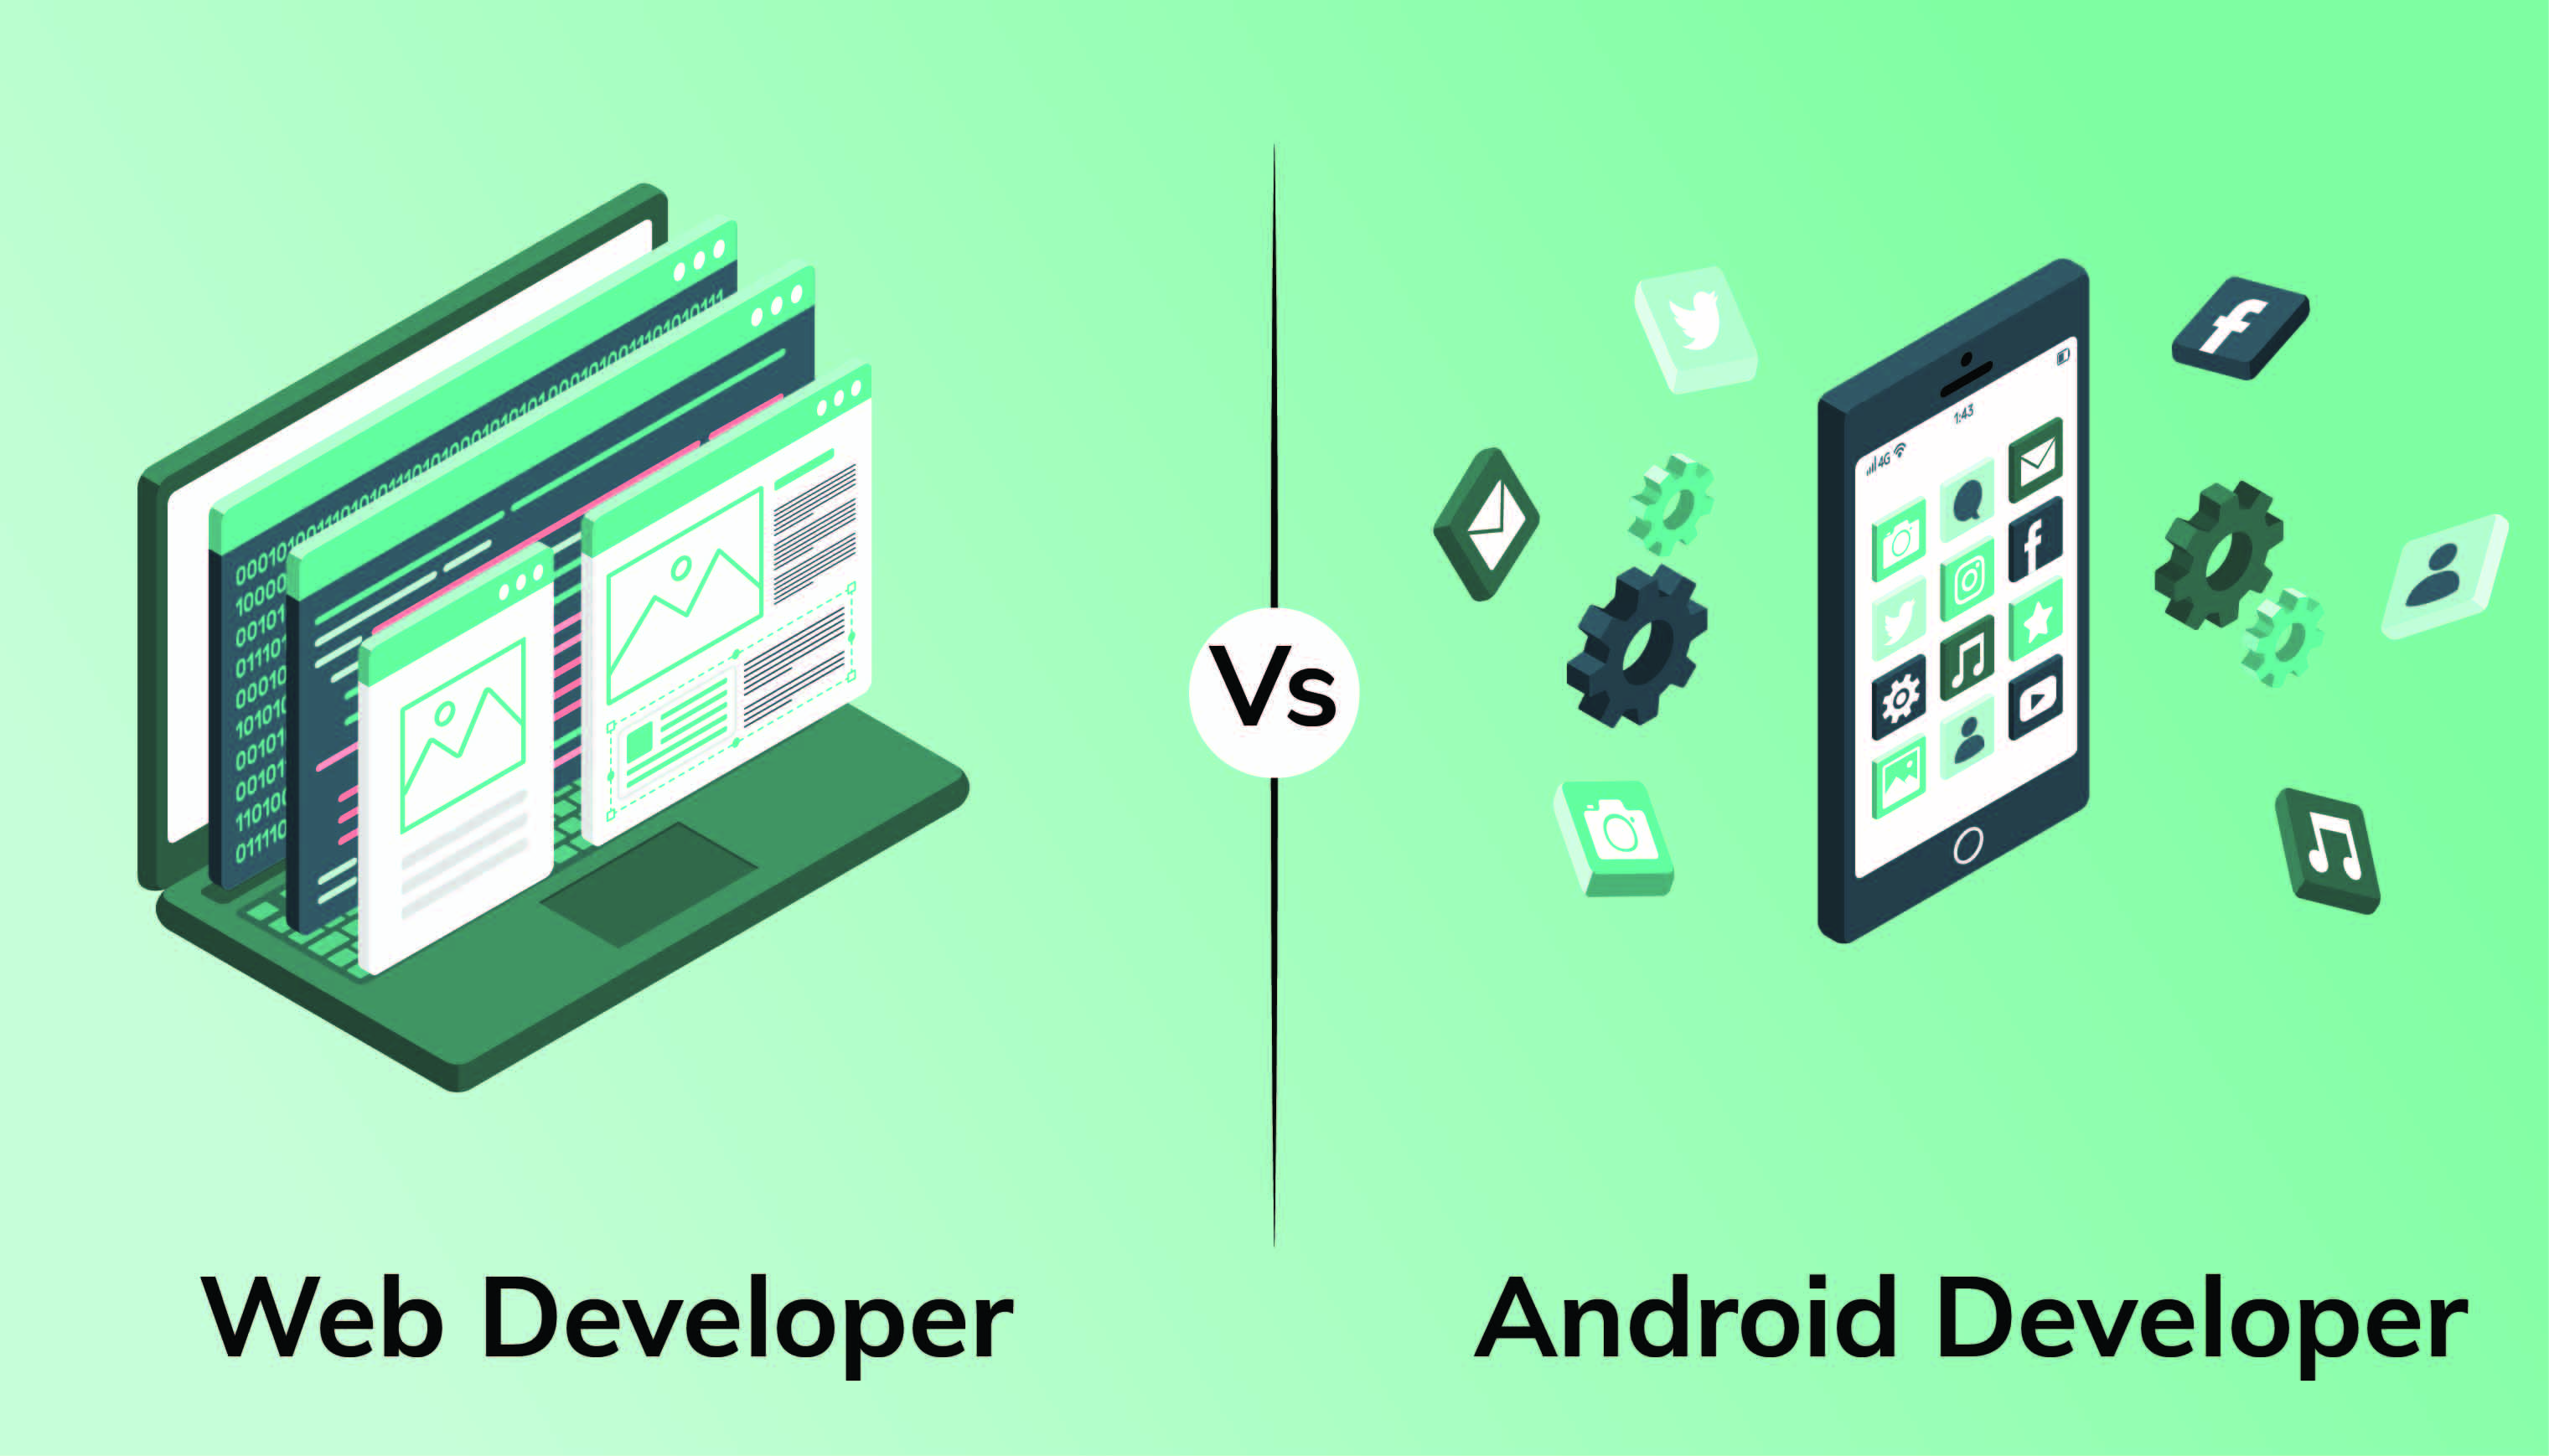 Android Developer VS Web Developer: Which Is The Best?